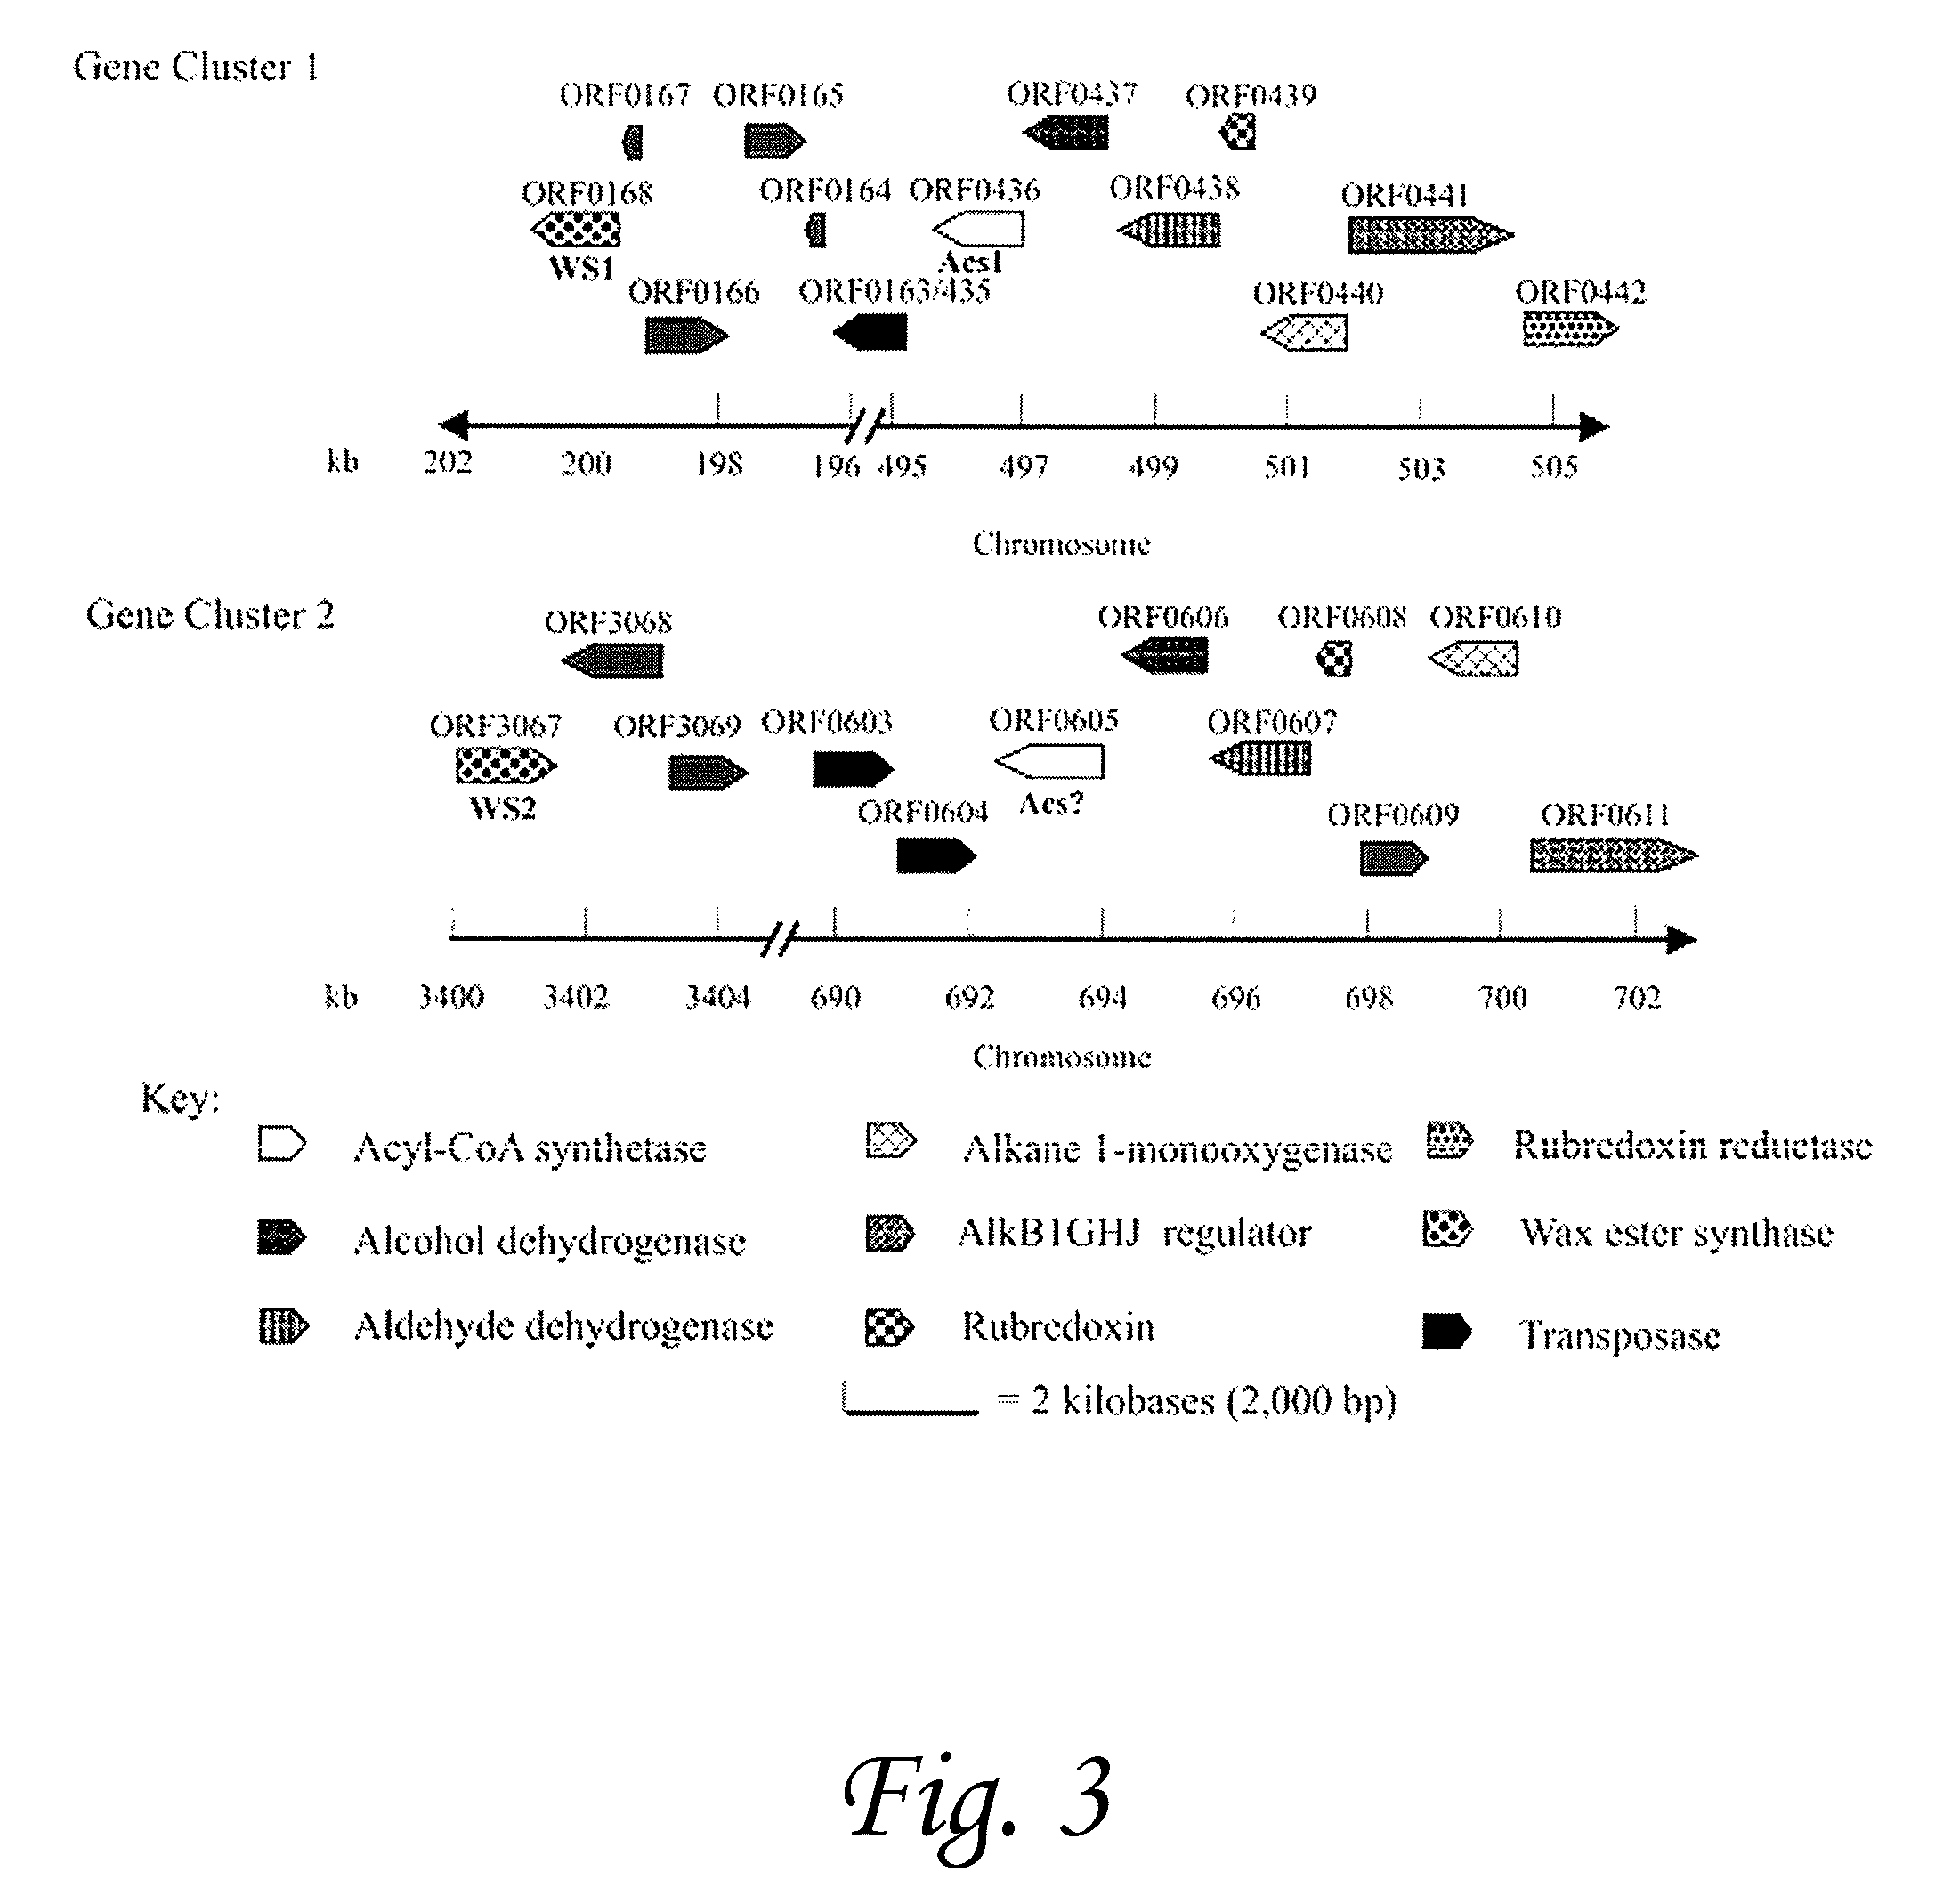 Isoprenoid wax ester synthases, isoprenoid acyl CoA-synthetases, and uses thereof